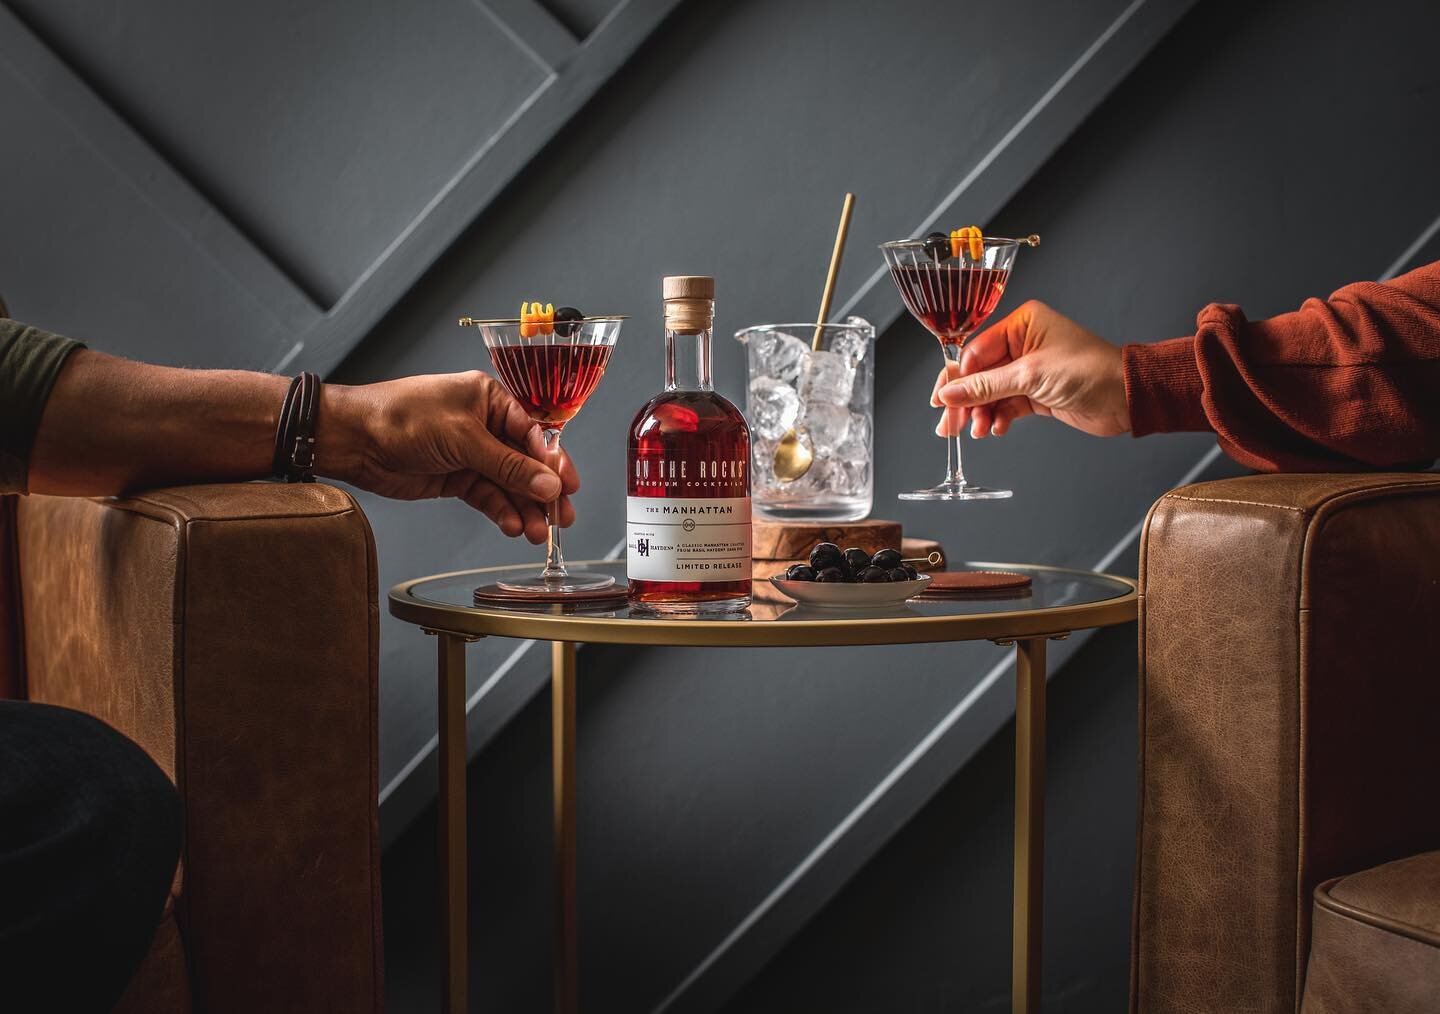 ⁣
Sundays are for sipping 🥃 ⁣
⁣
Already forgot my whole &ldquo;gonna post every day in February&rdquo; thing yesterday but what can you do! Thought it might be time to share some of this awesome shoot I did last year for @otrcocktails. ⁣
⁣
Shoutout 